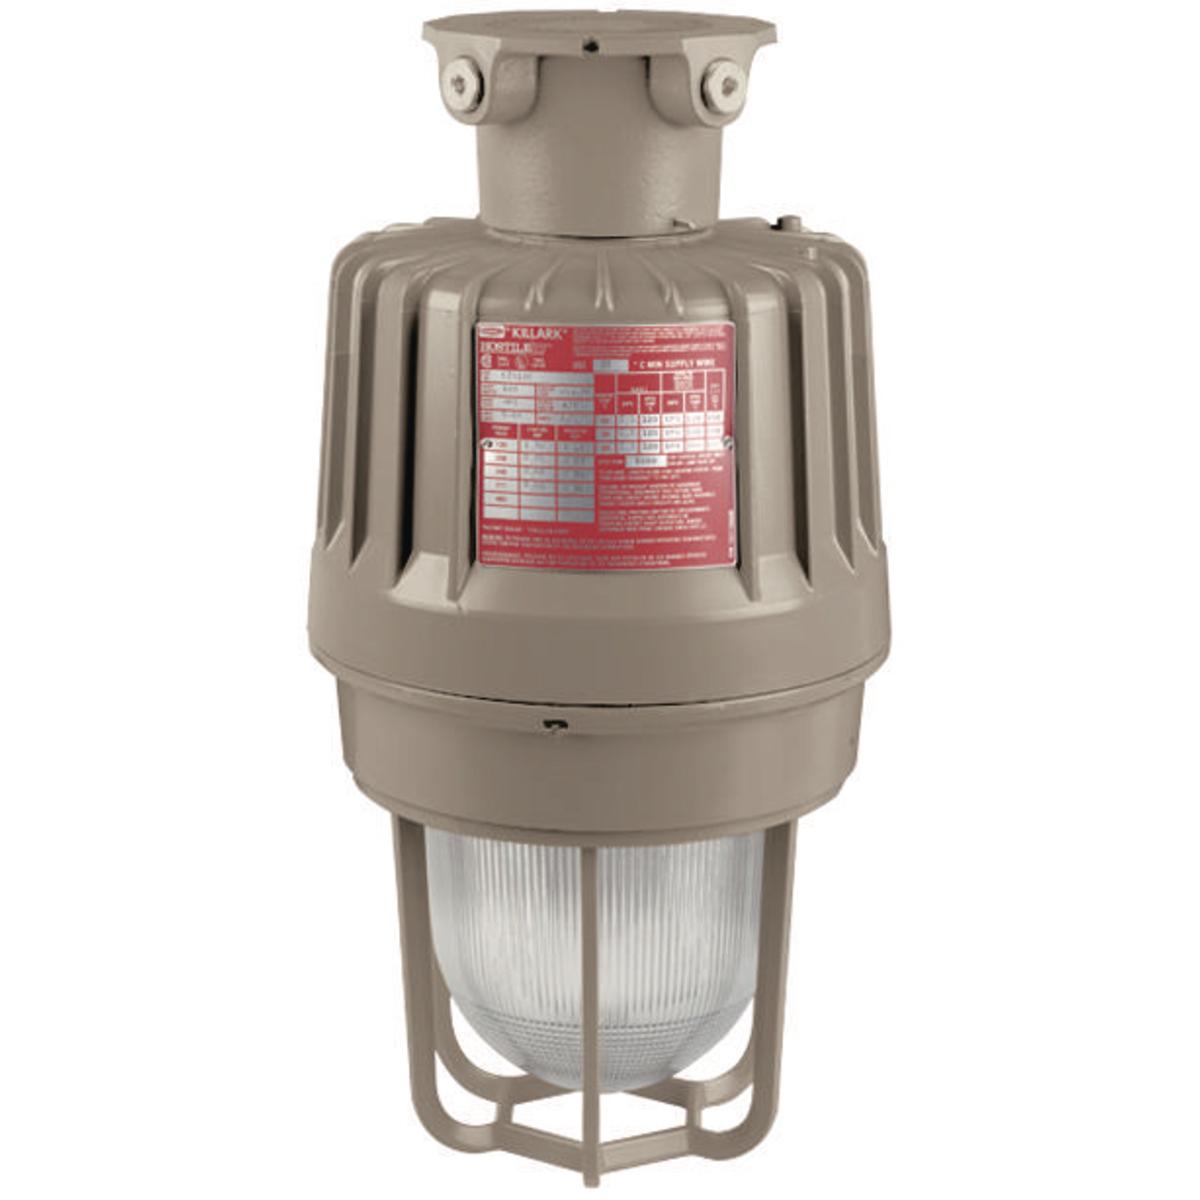 Hubbell EZP175X2G 175W 480V Pulse-Start Metal Halide 3/4" Ceiling Mount with Guard  ; Three light sources – High Pressure Sodium (50-400W), Metal Halide (70-400W) and Pulse Start Metal Halide (175-400W) ; Mounting choice –Pendant, ceiling, 25˚ stanchion or 90˚ wall mount, 